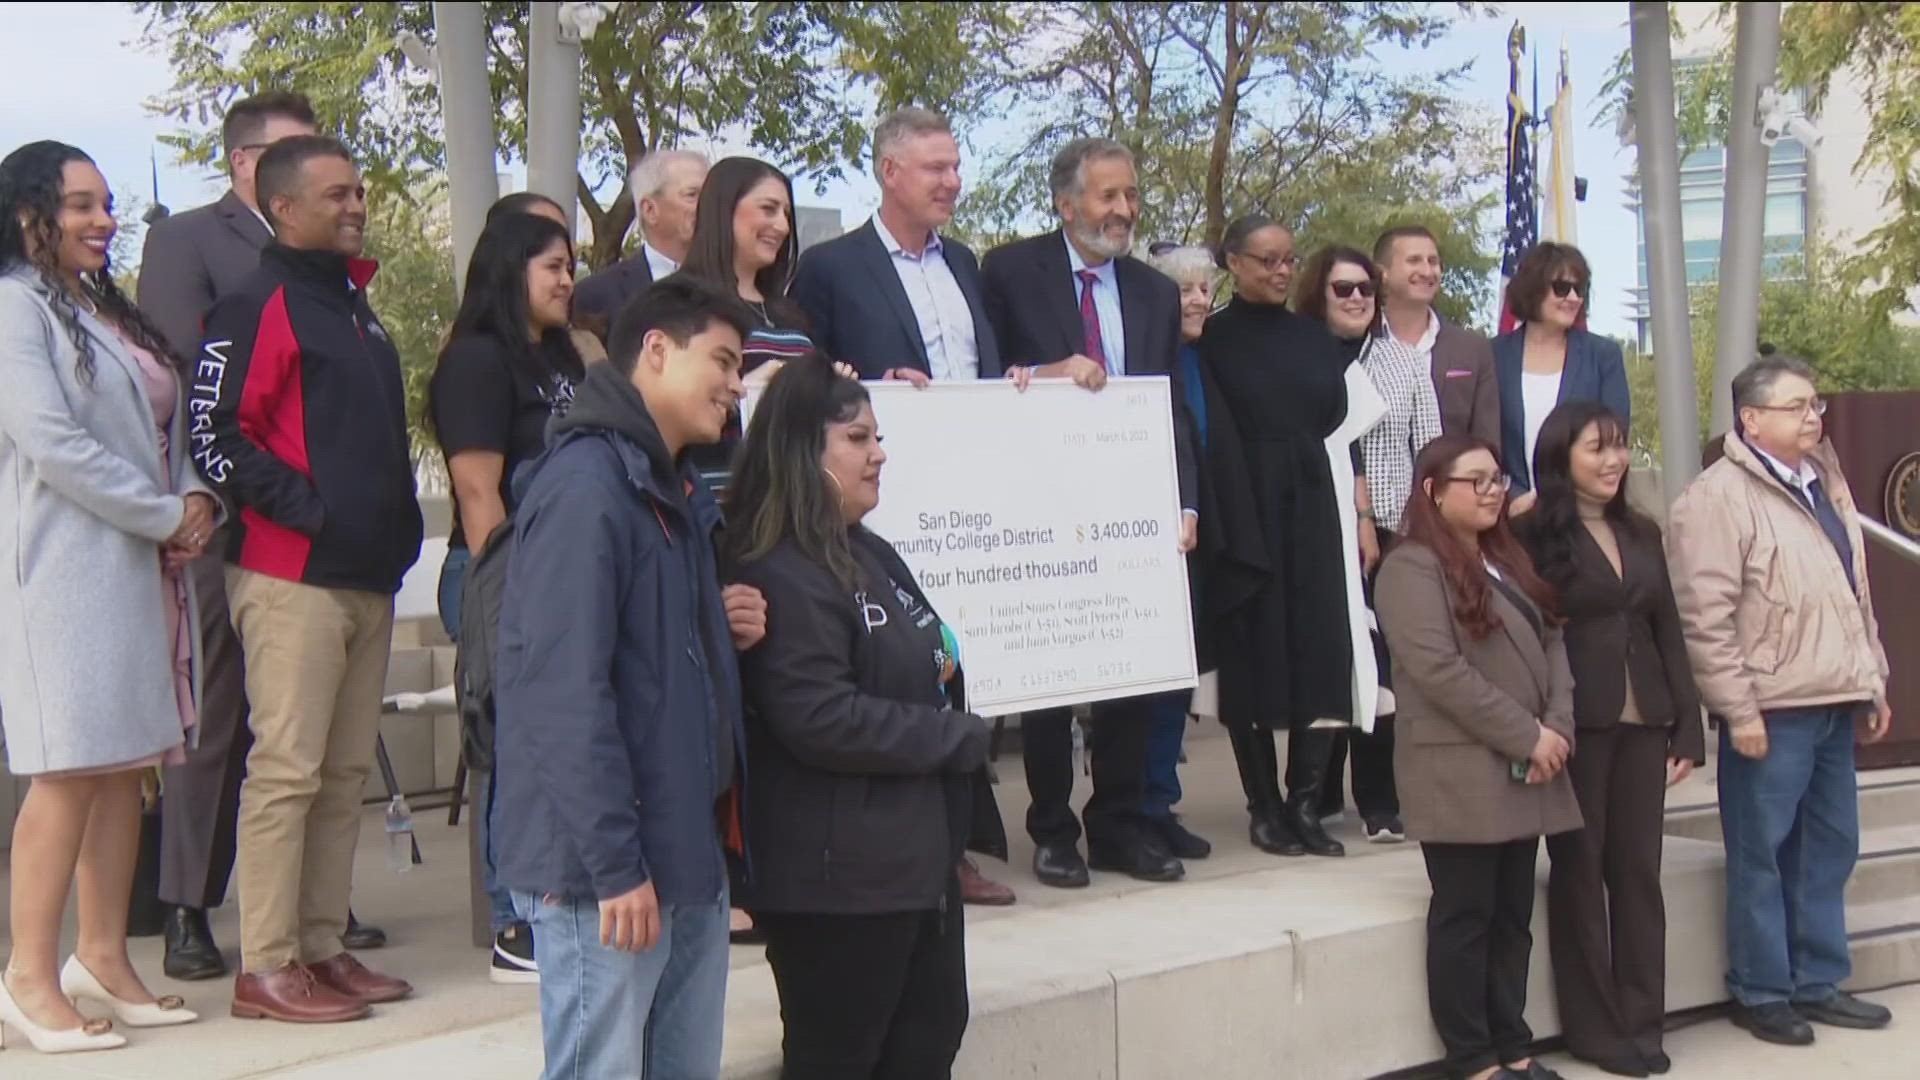 The money will fund projects supporting LGBTQ+ students, services for those aging out of the foster system, and dreamer resource centers at the 4 district campuses.